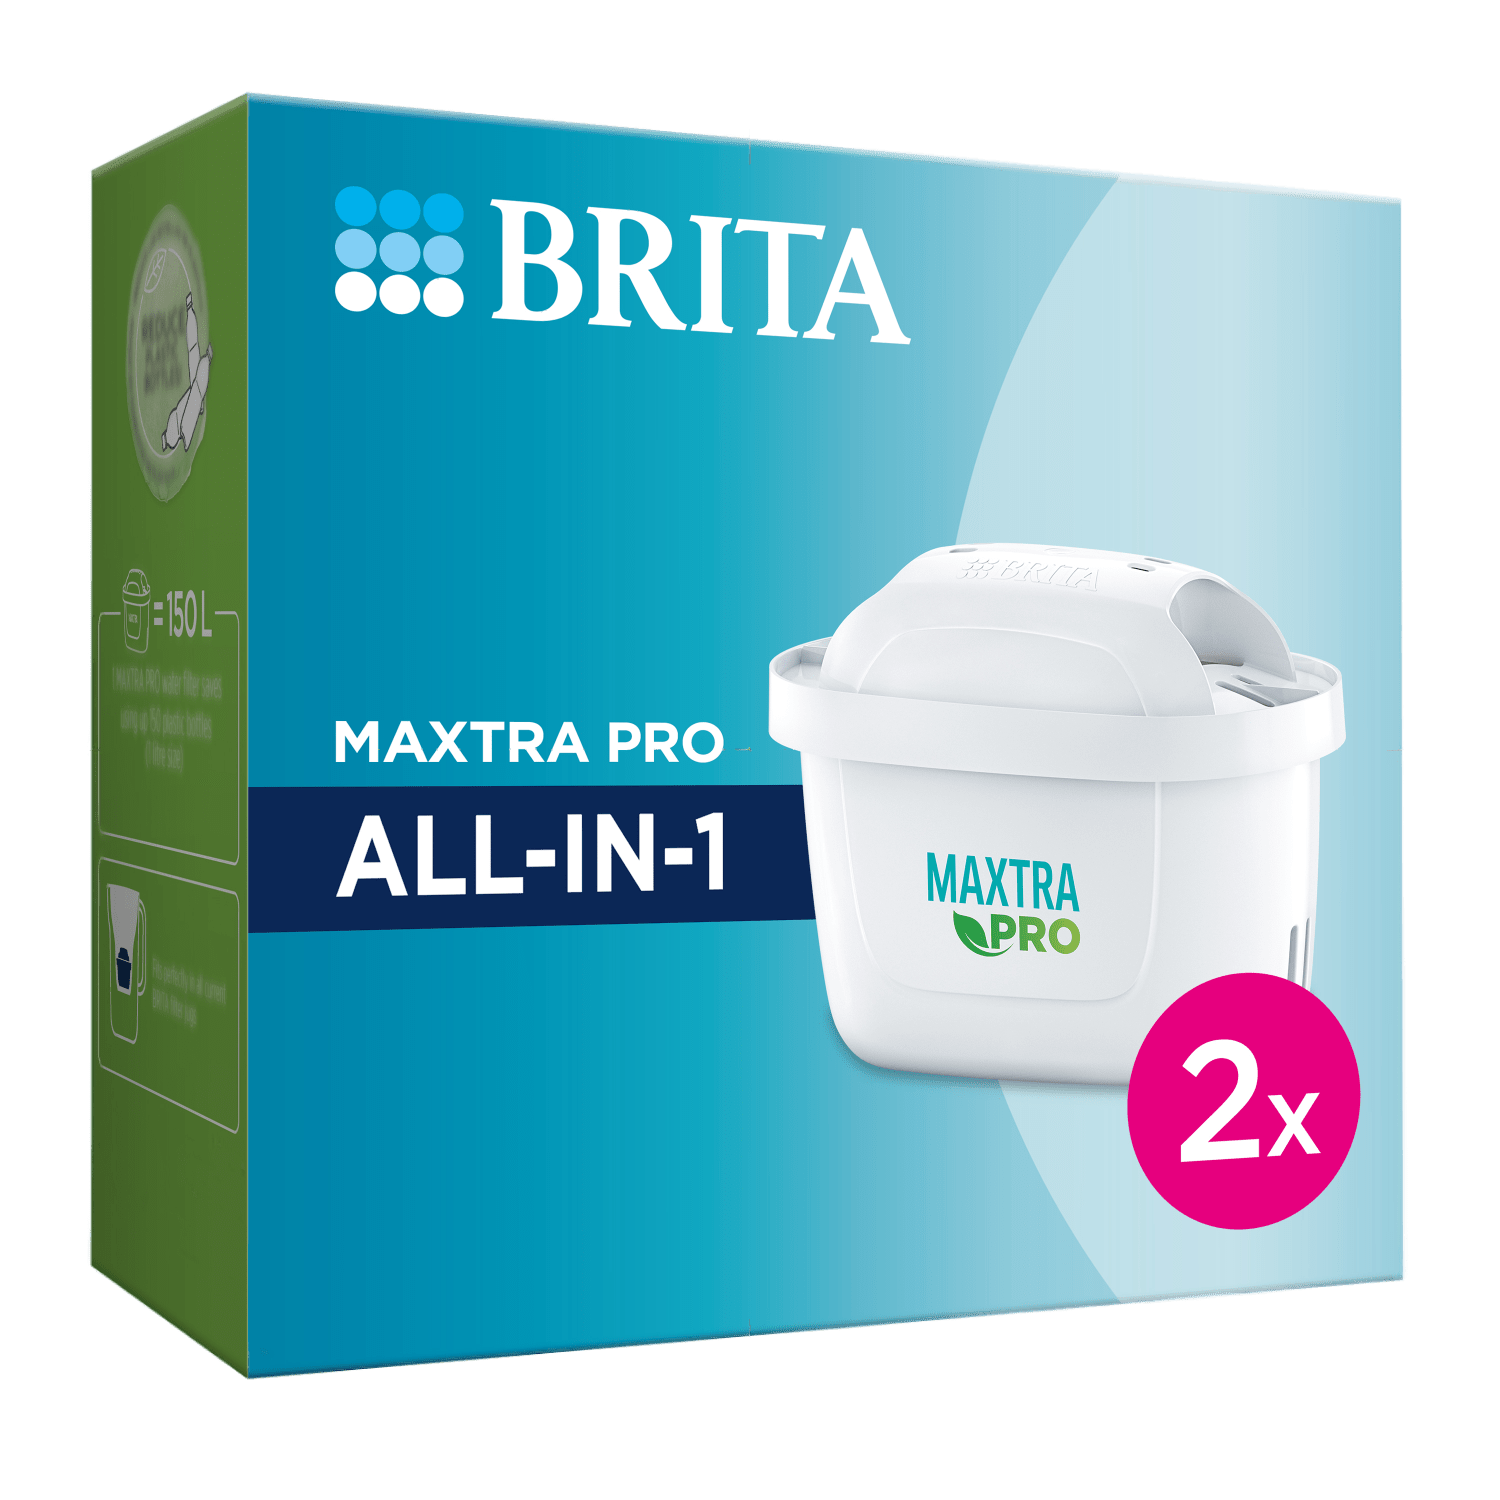 Brita Waterfilterpatroon Maxtra Pro All-in-1 2-pack